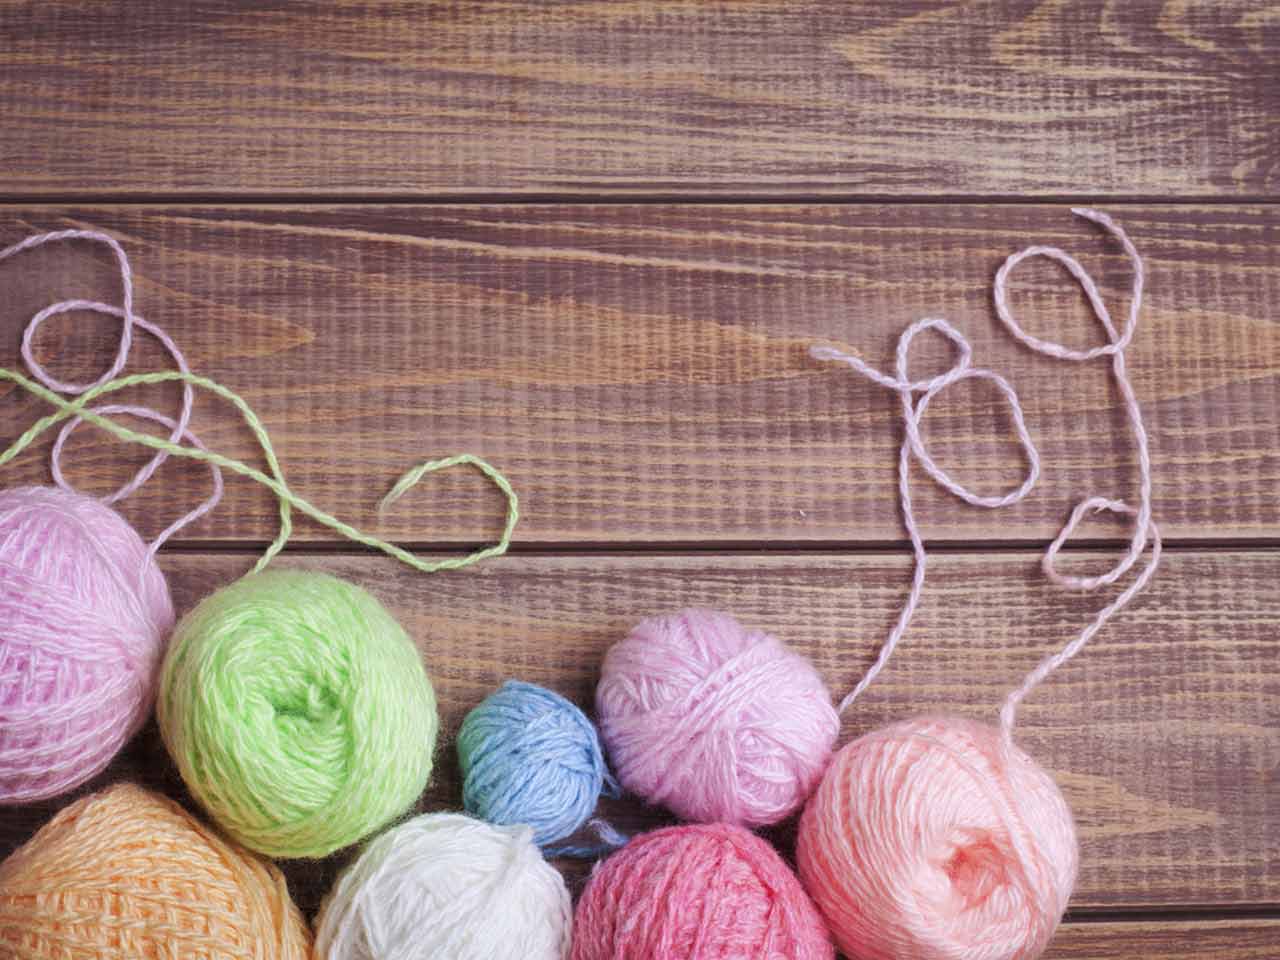 8 Ways to Knit or Crochet for Charity